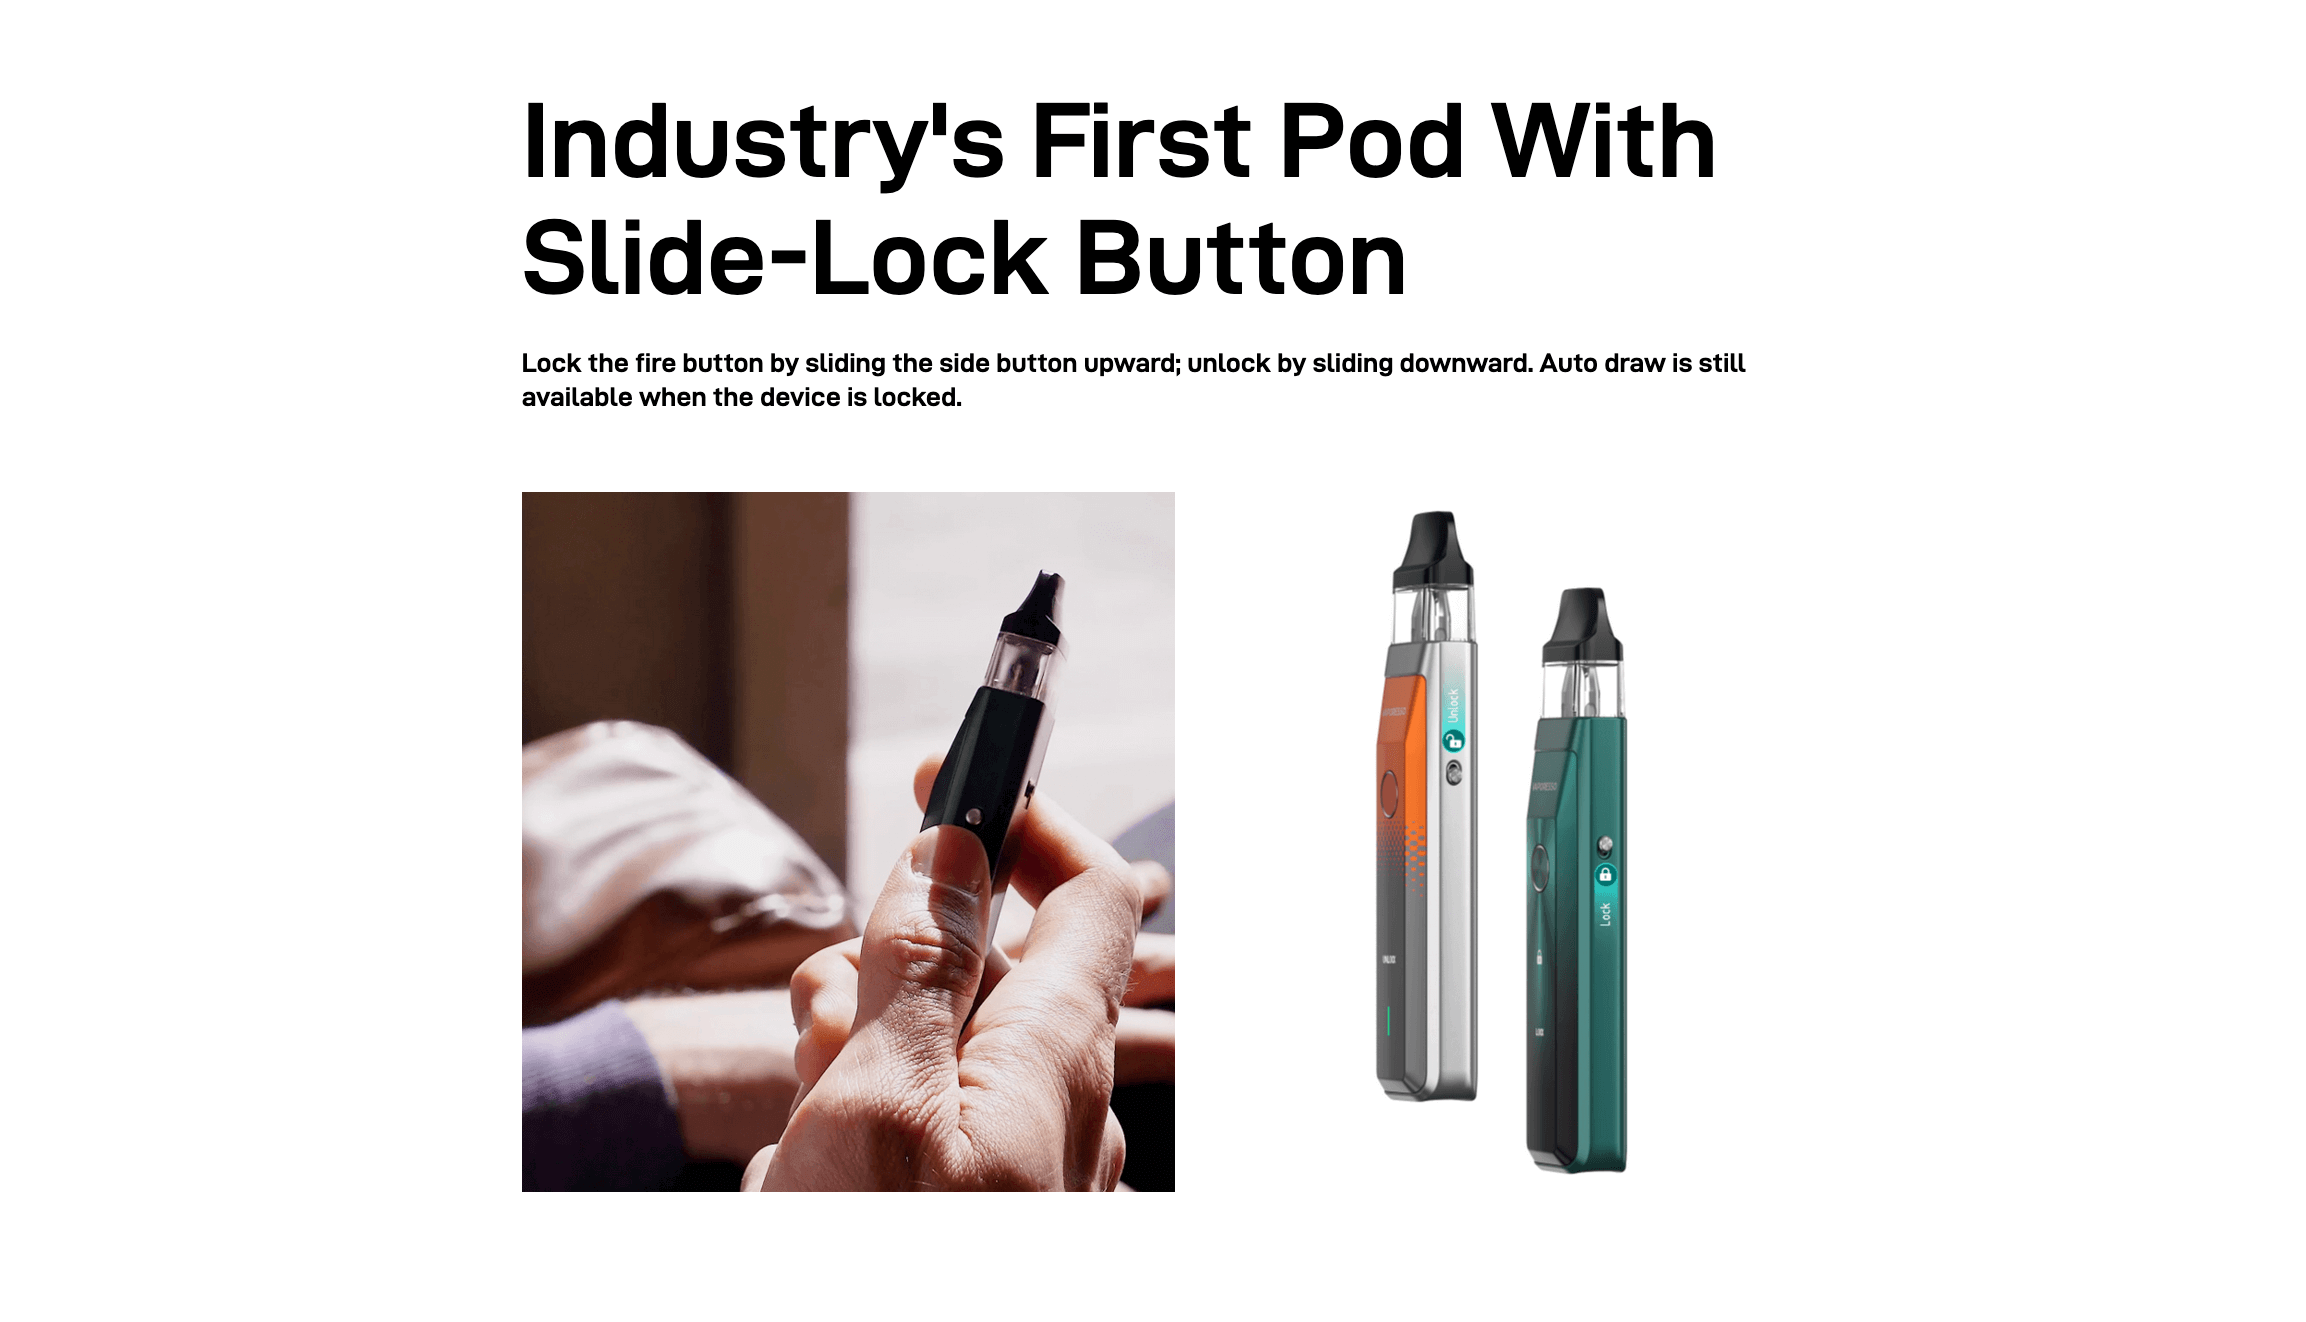 Vaporesso Xros Pro - Featuring the industry's first pod with slide-lock button